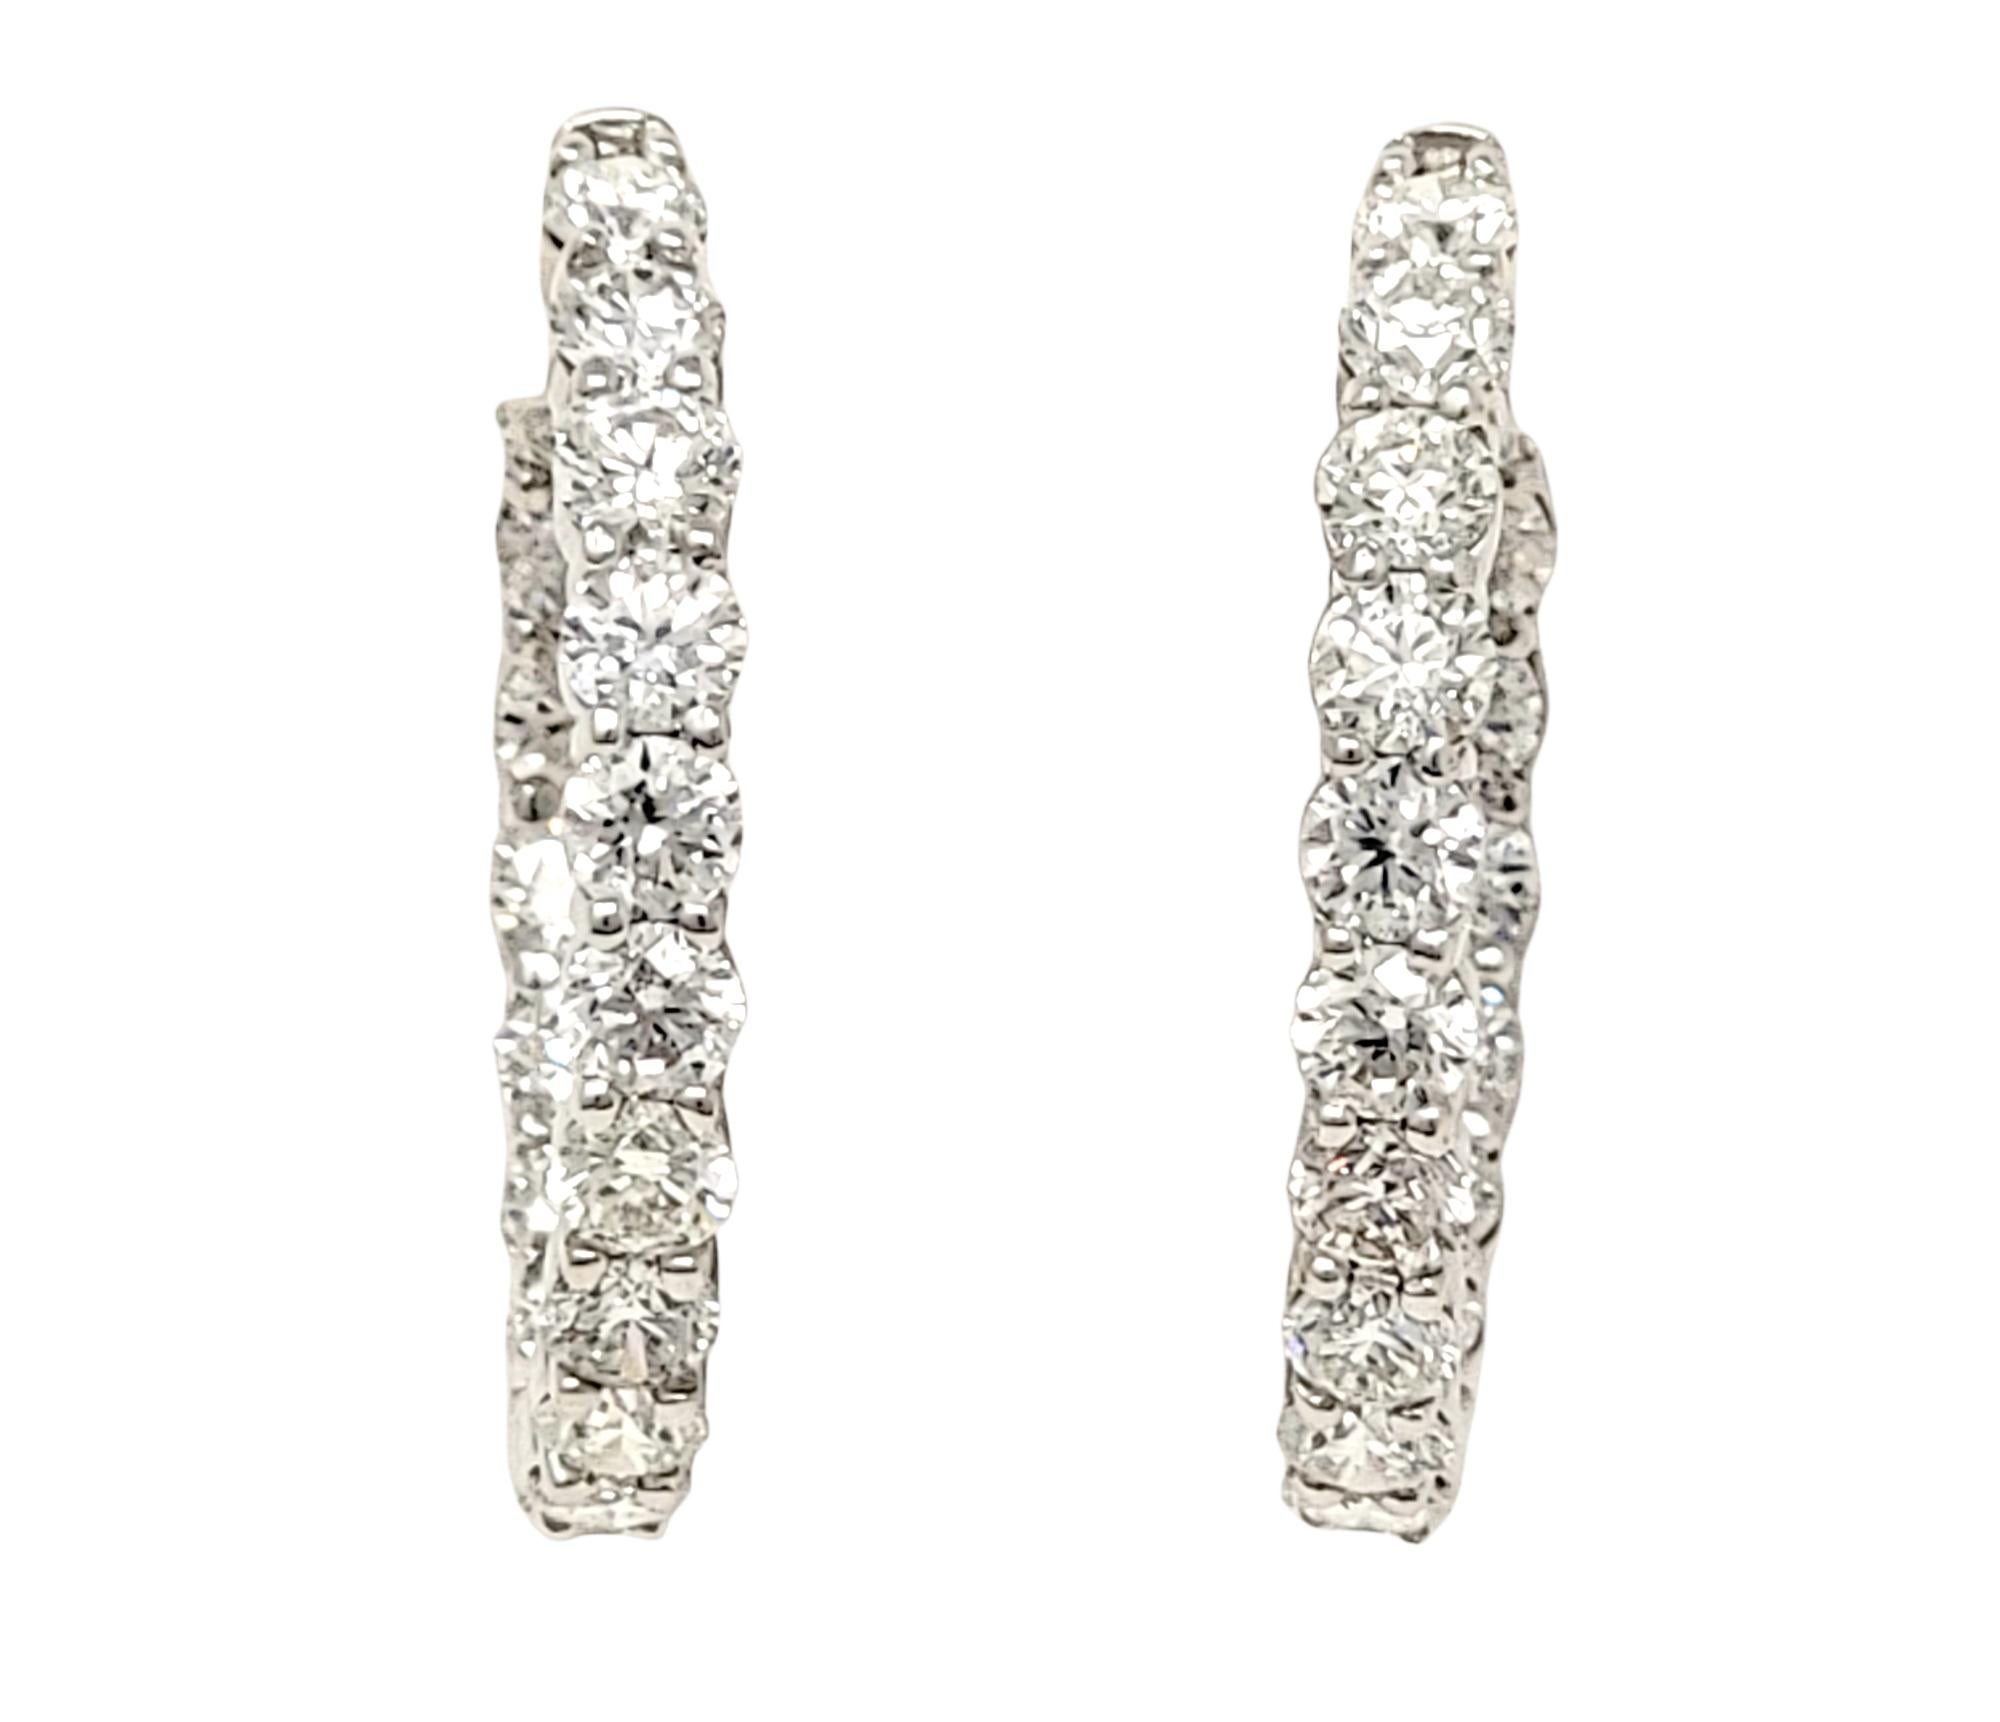 If you are looking for dazzling sparkle from every angle, these stunning diamond hoop earrings will not disappoint! Arranged in a unique inside/outside setting, the diamonds are positioned to catch the light from different angles, making your lobes